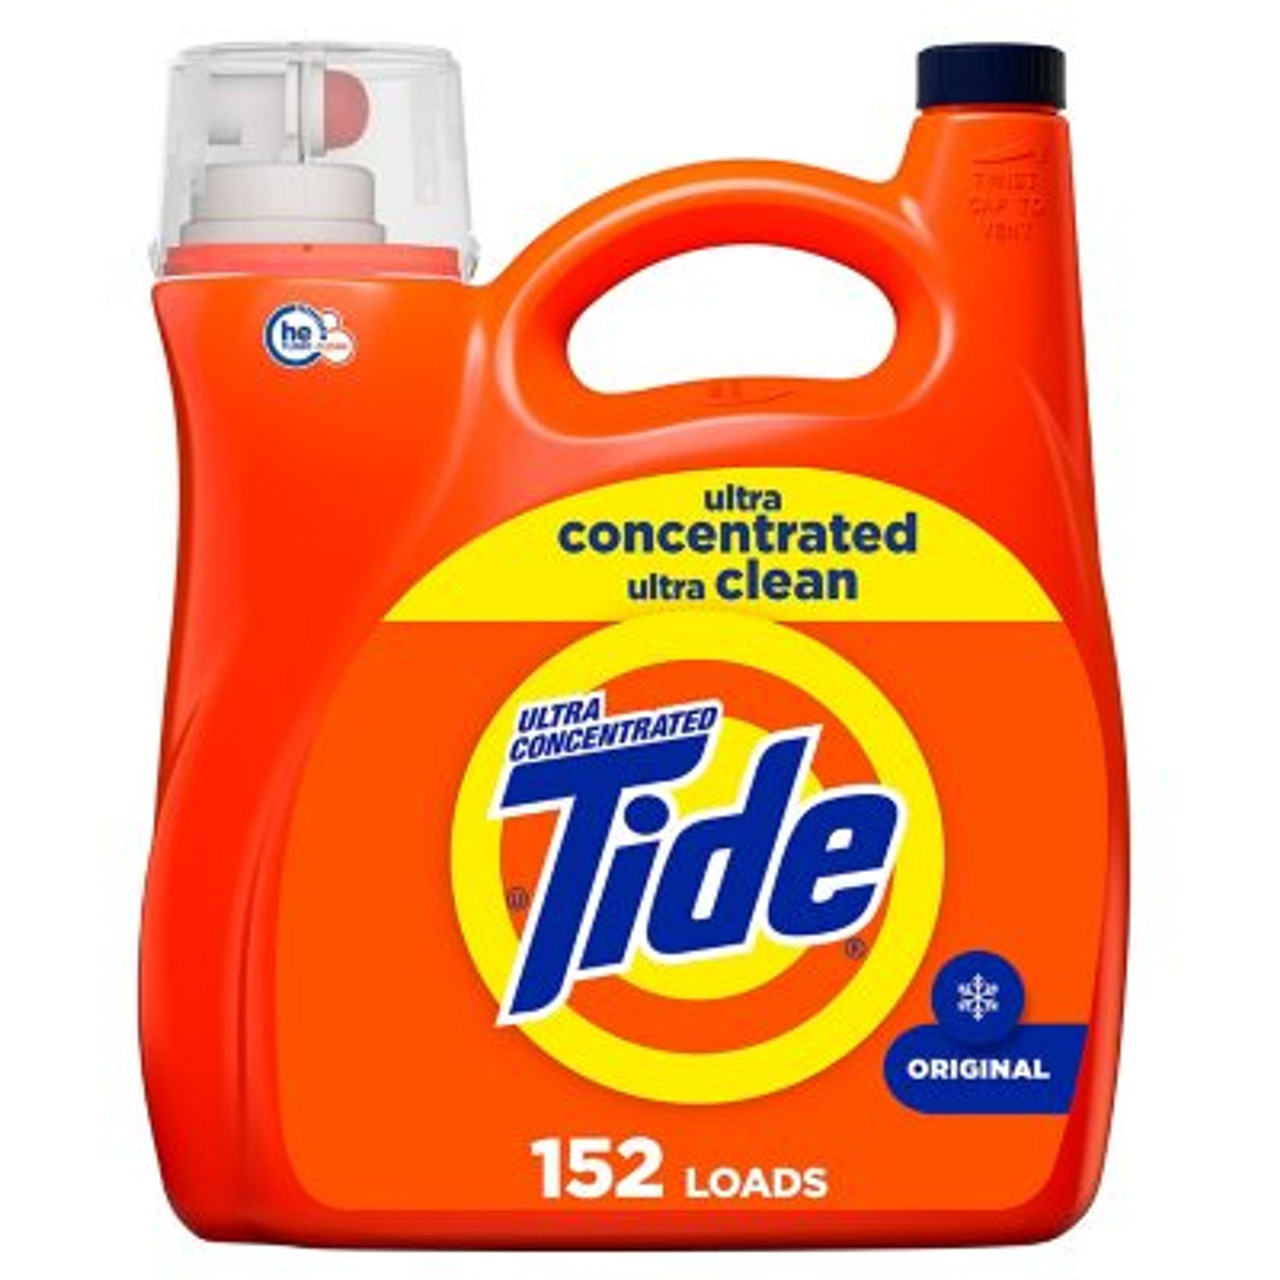 Tide Ultra Concentrated Liquid Laundry Detergent, Original (152 loads, 170 fl. oz.) - [From 105.00 - Choose pk Qty ] - *Ships from Miami